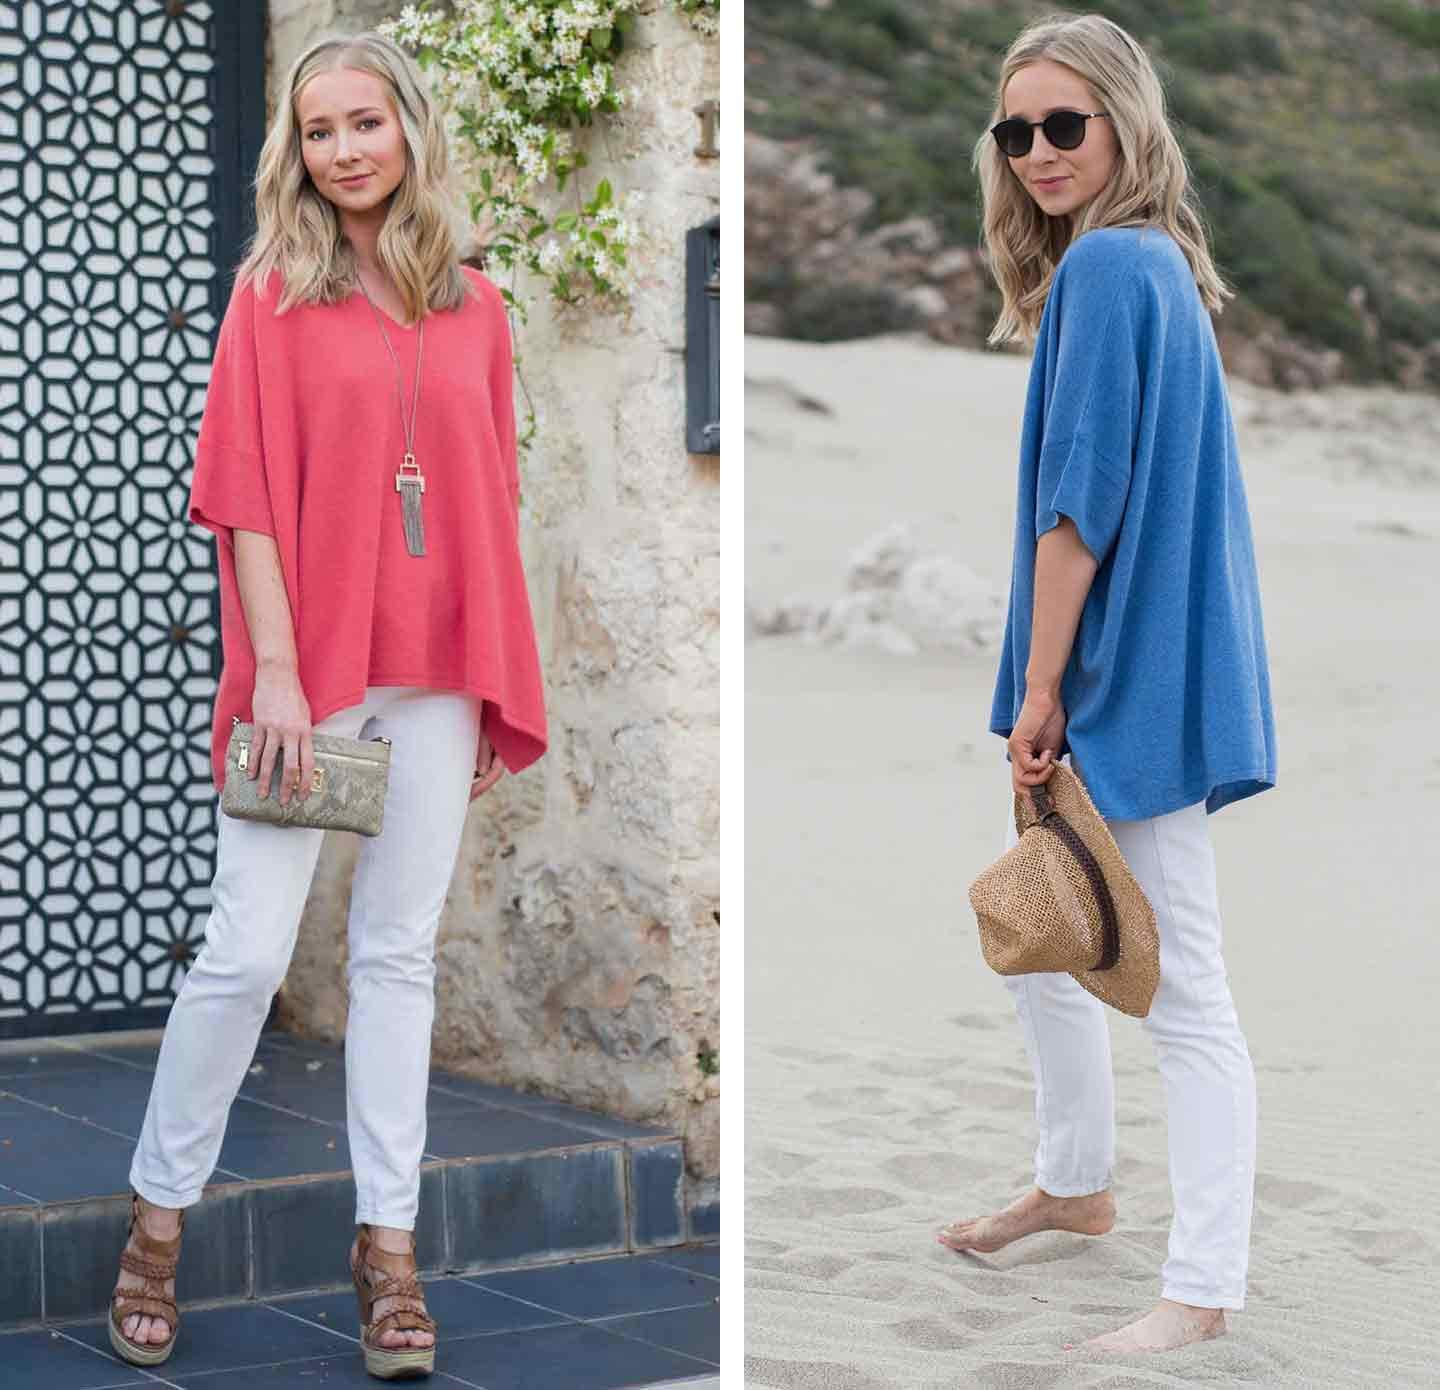 One-woman-standing-infront-of-a-blue-door-on-a-step-wearing-a-pink-cashmere-jumper-with-white-jeans-wedges-and-handbag-and-another-image-of-a-woman-on-a-beach-in-blue-kimono-jumper-